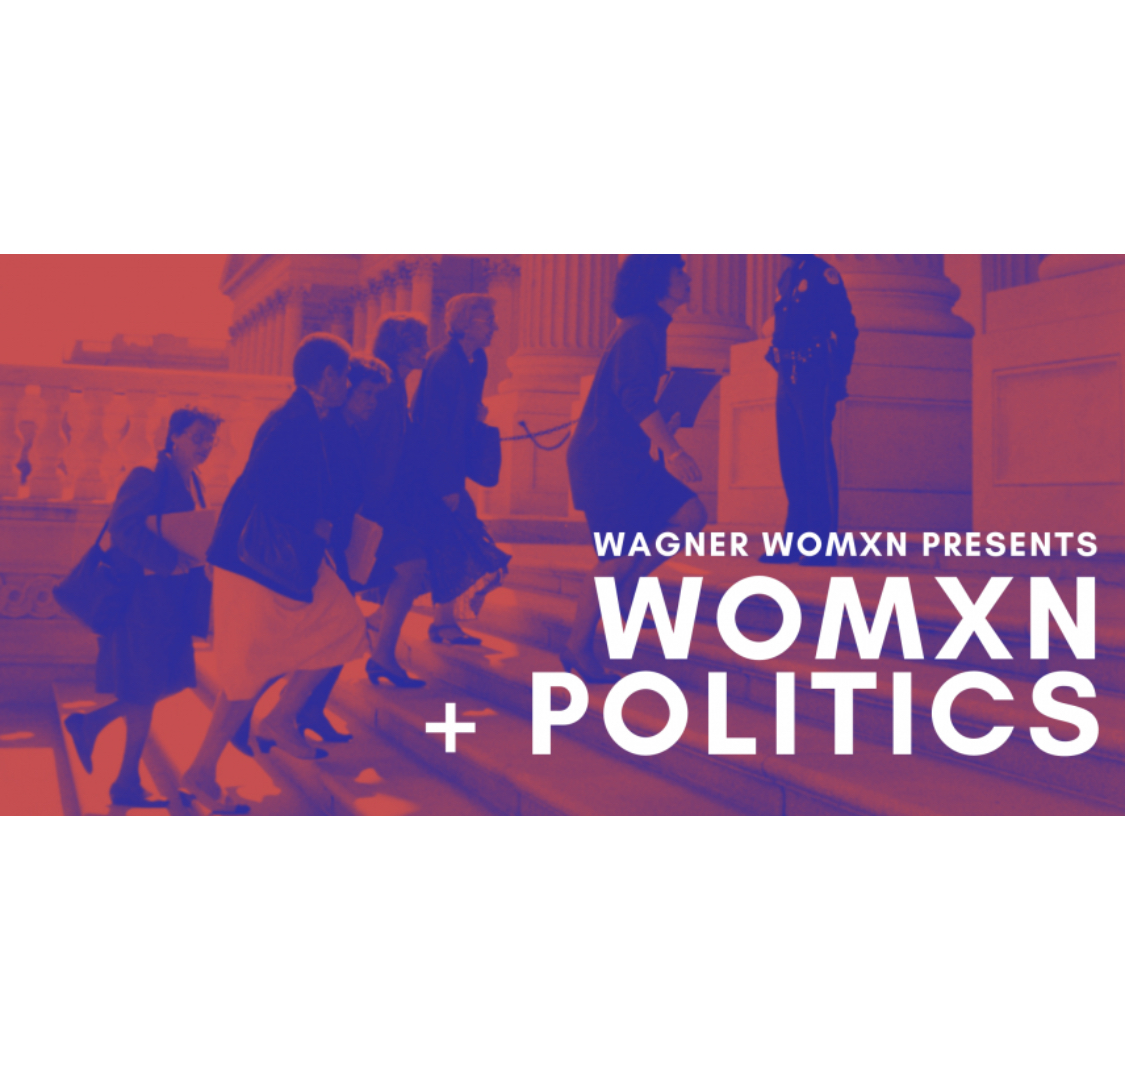 Womxn + Politics: The Experience of Womxn in the Political Sphere